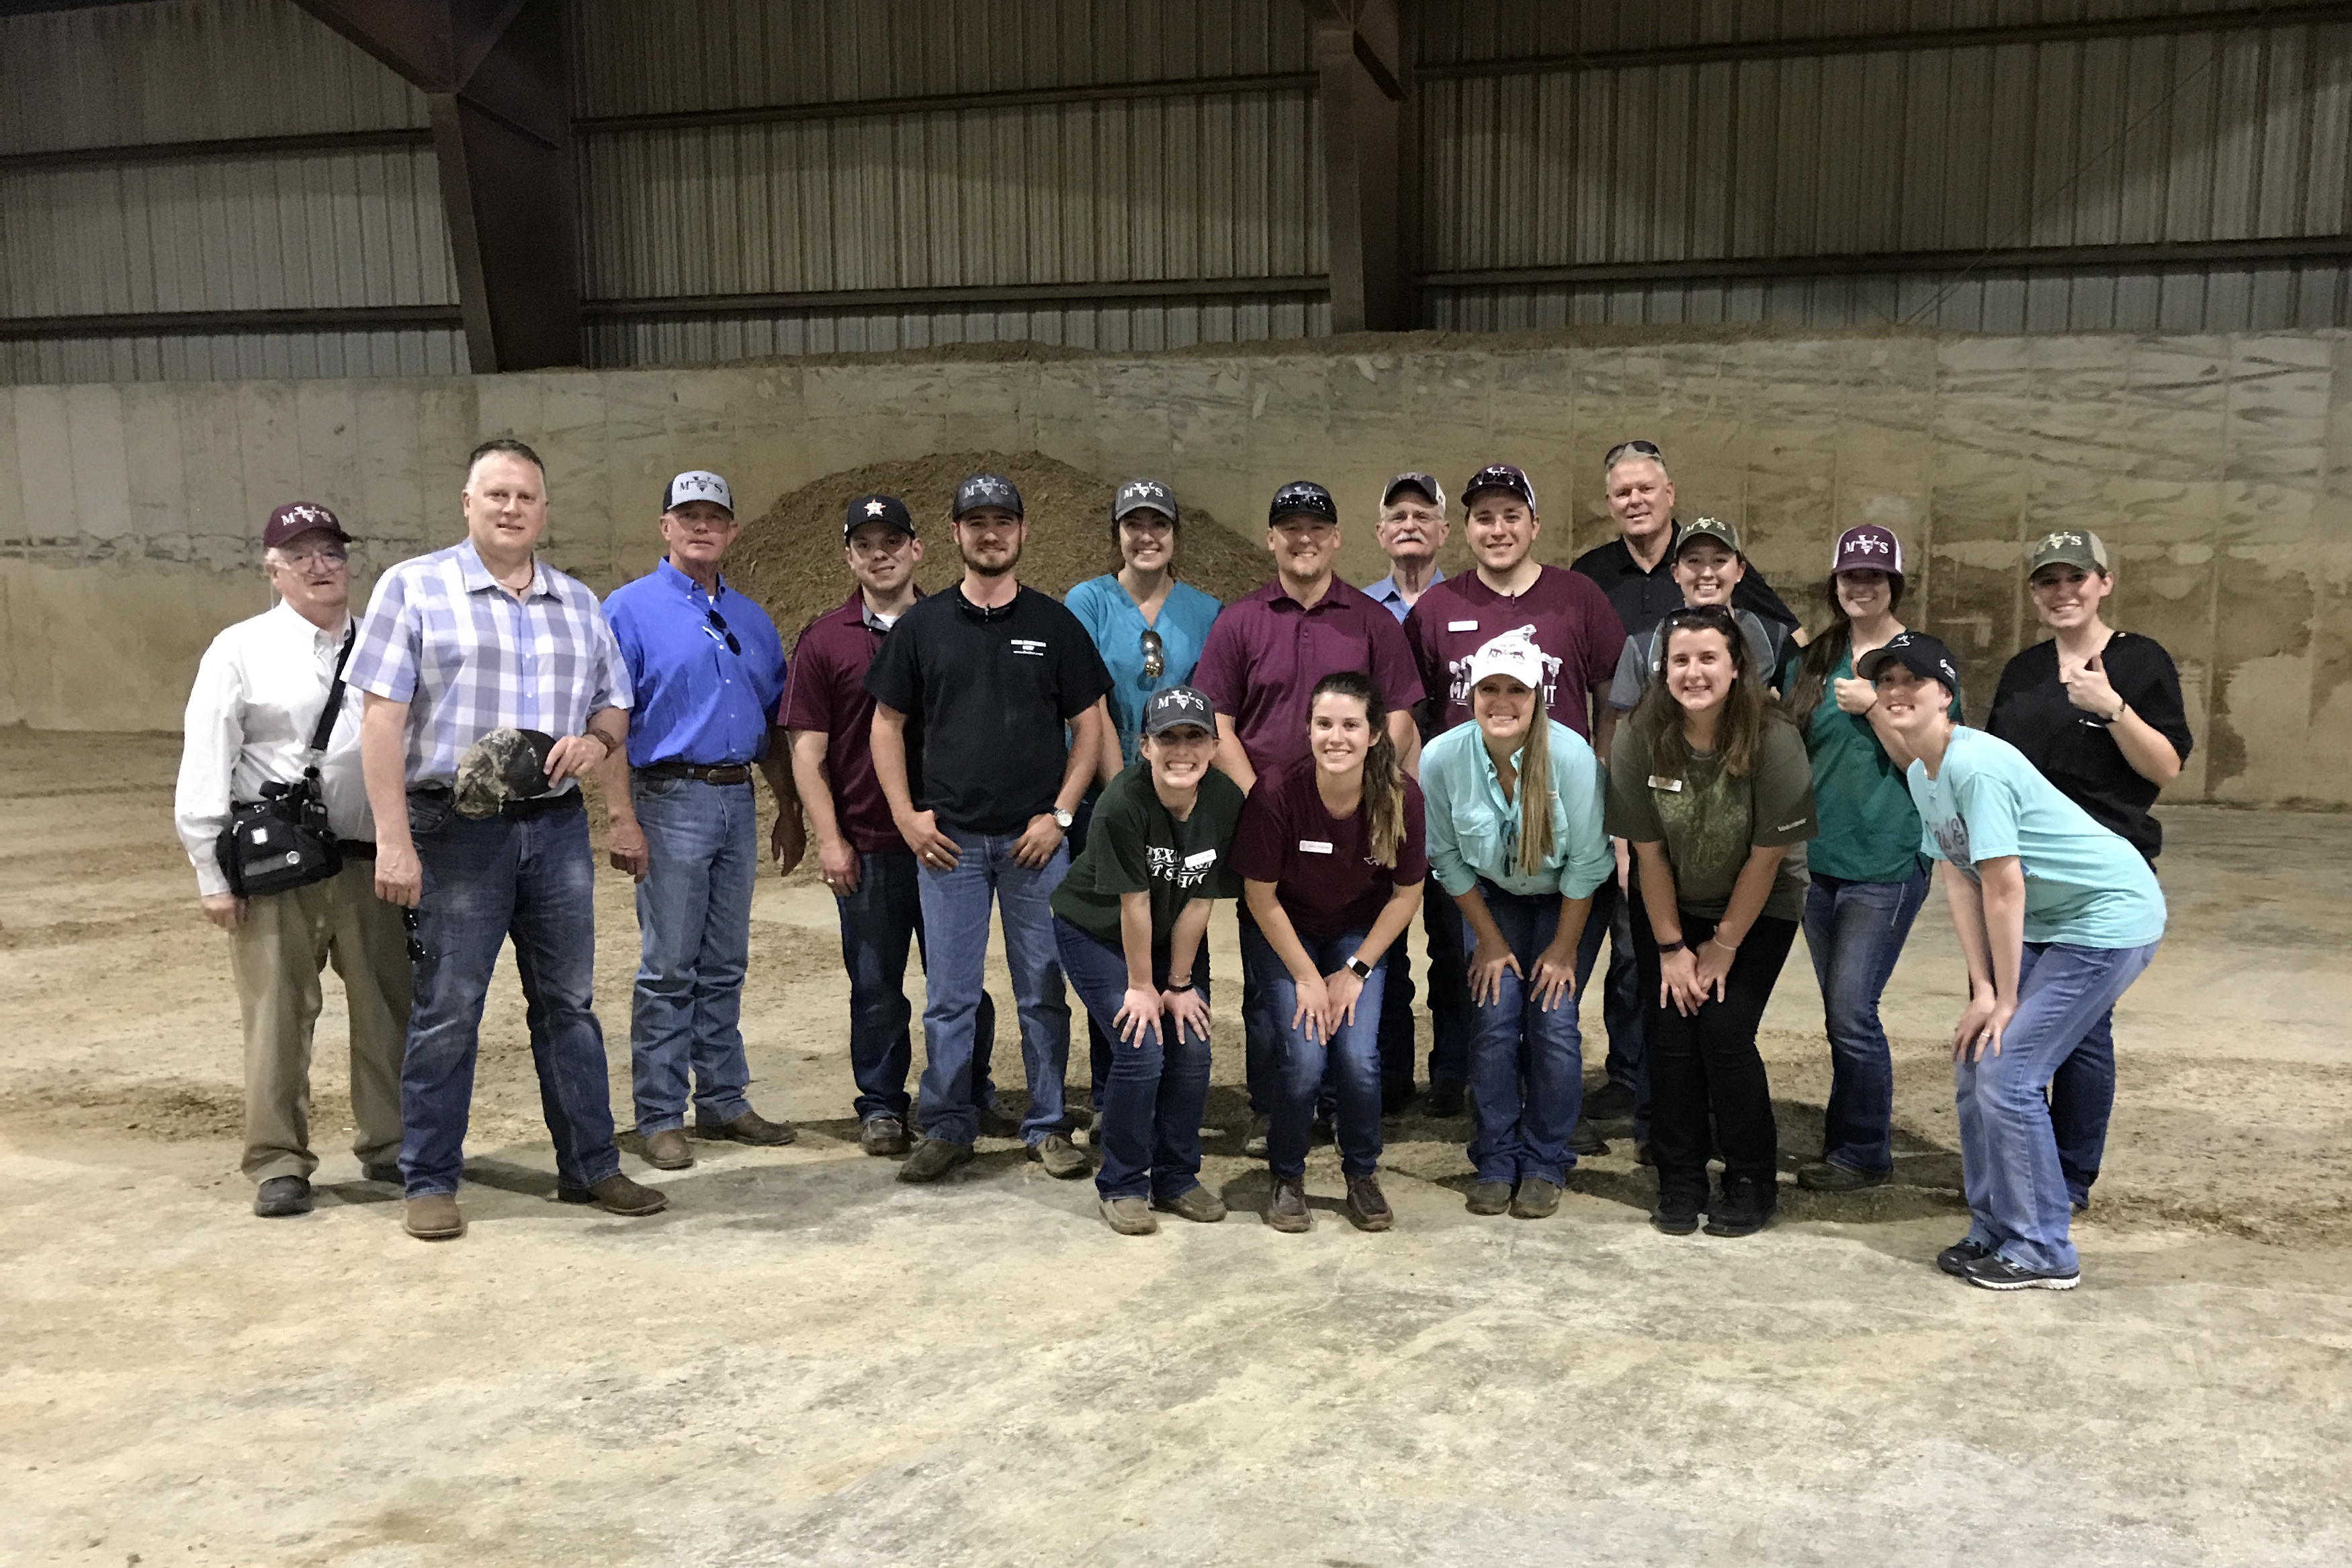 A group of students and VERO leaders stand in an empty barn, smiling for the camera